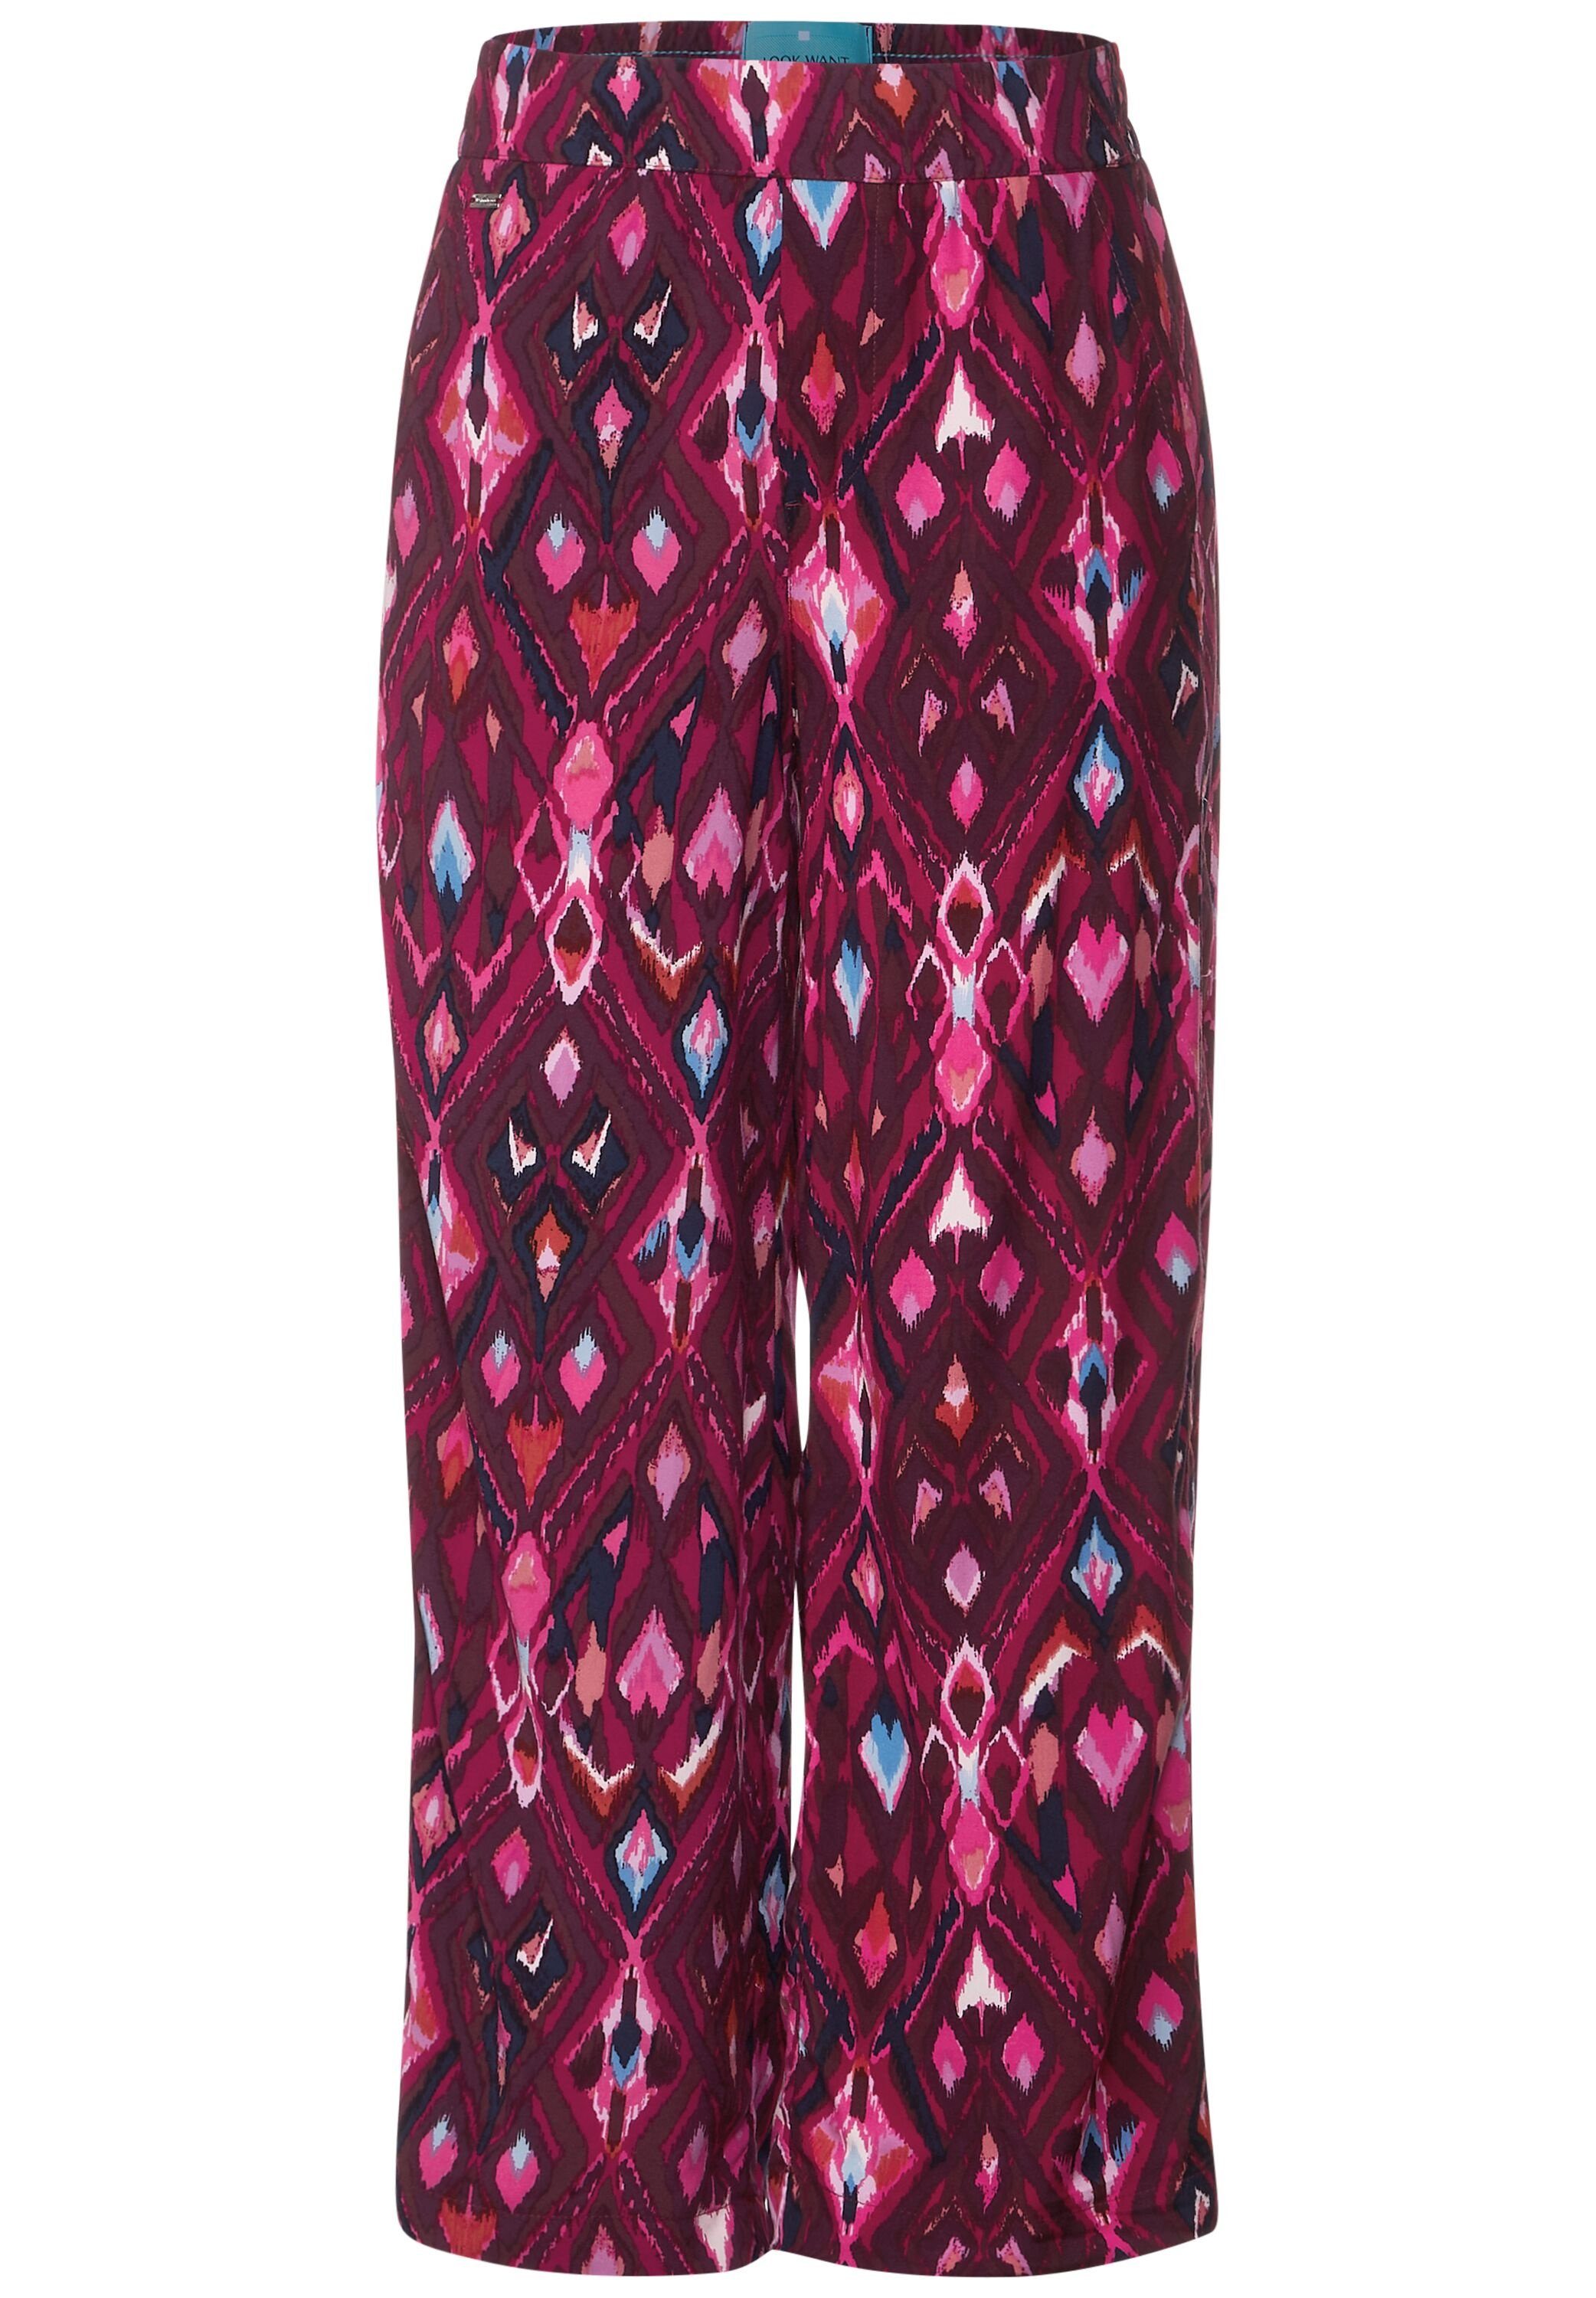 Stoffhose Ikatprint berry mit ONE tamed Fit Hose STREET Loose